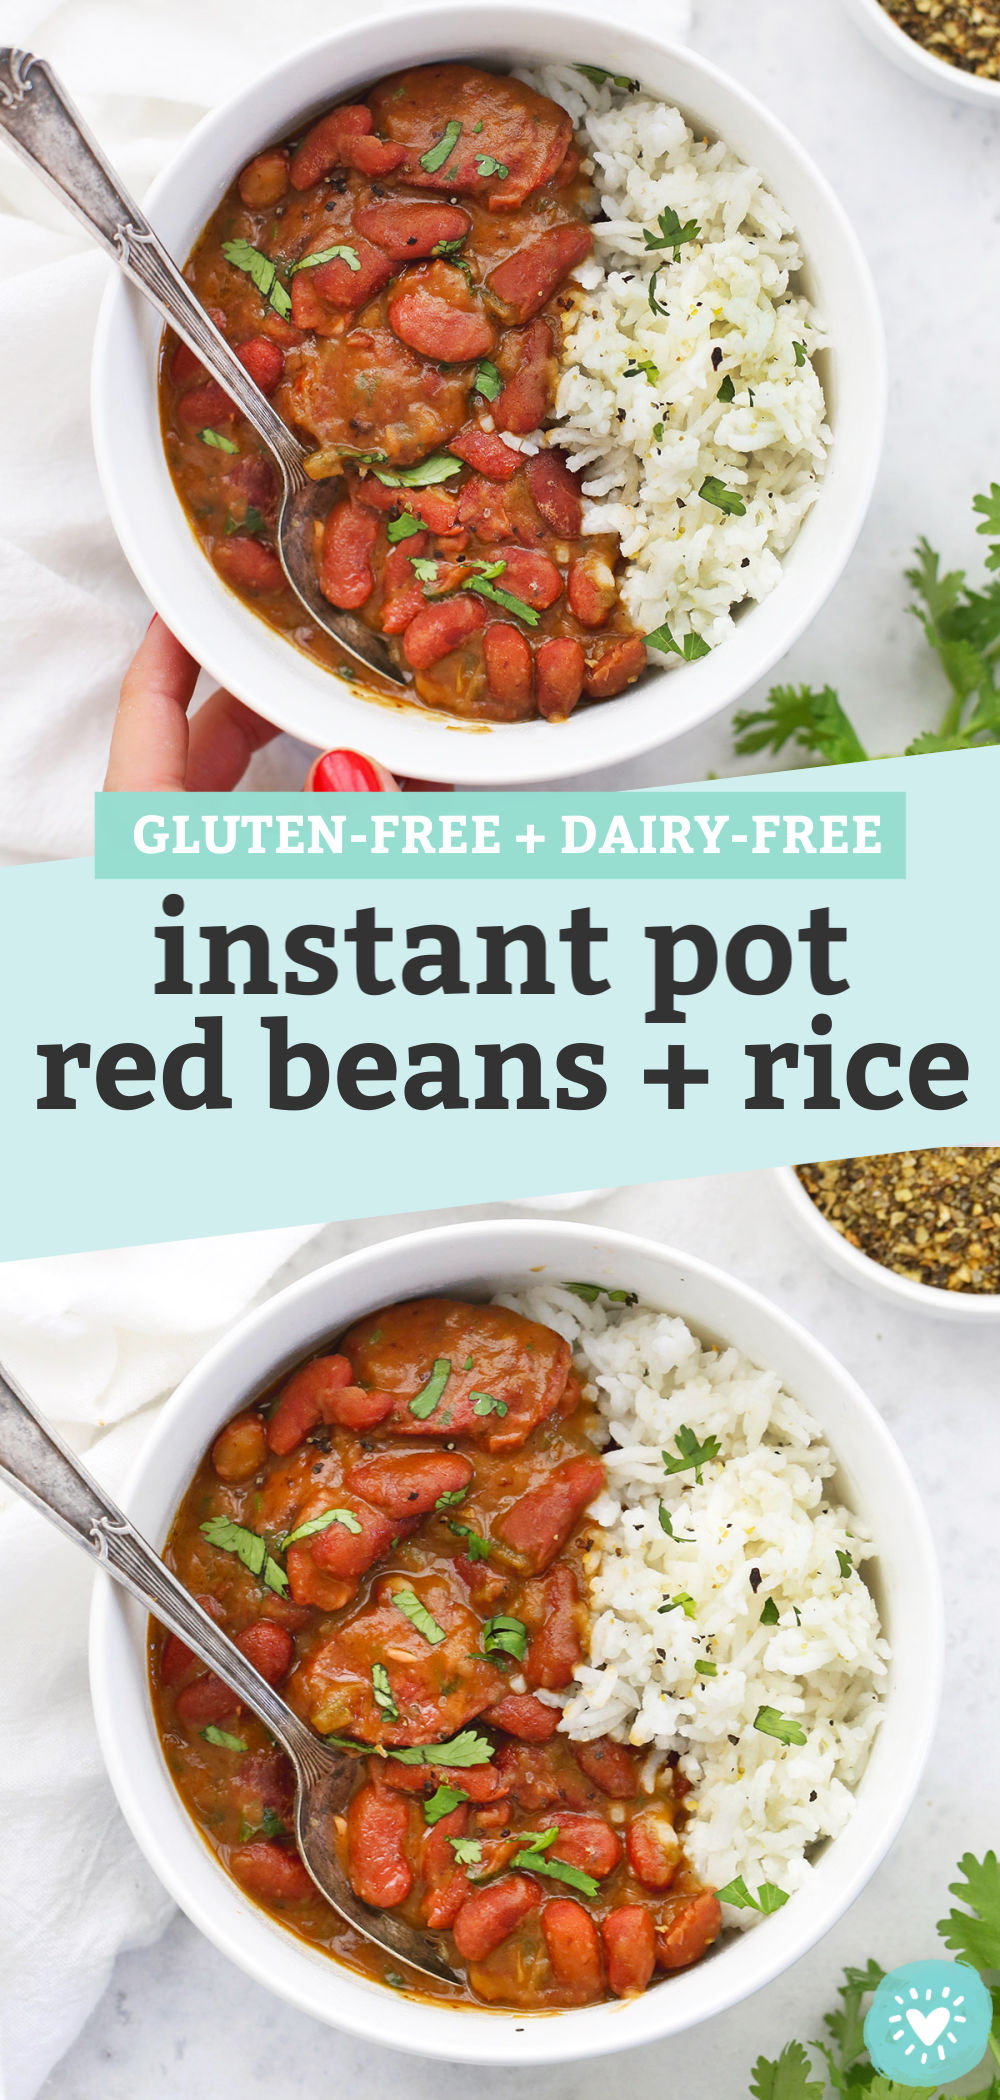 Collage of images of Instant Pot Red Beans and Rice in a bowl garnished with fresh herbs with text that reads "Gluten-Free + Dairy-free instant pot red beans + rice"